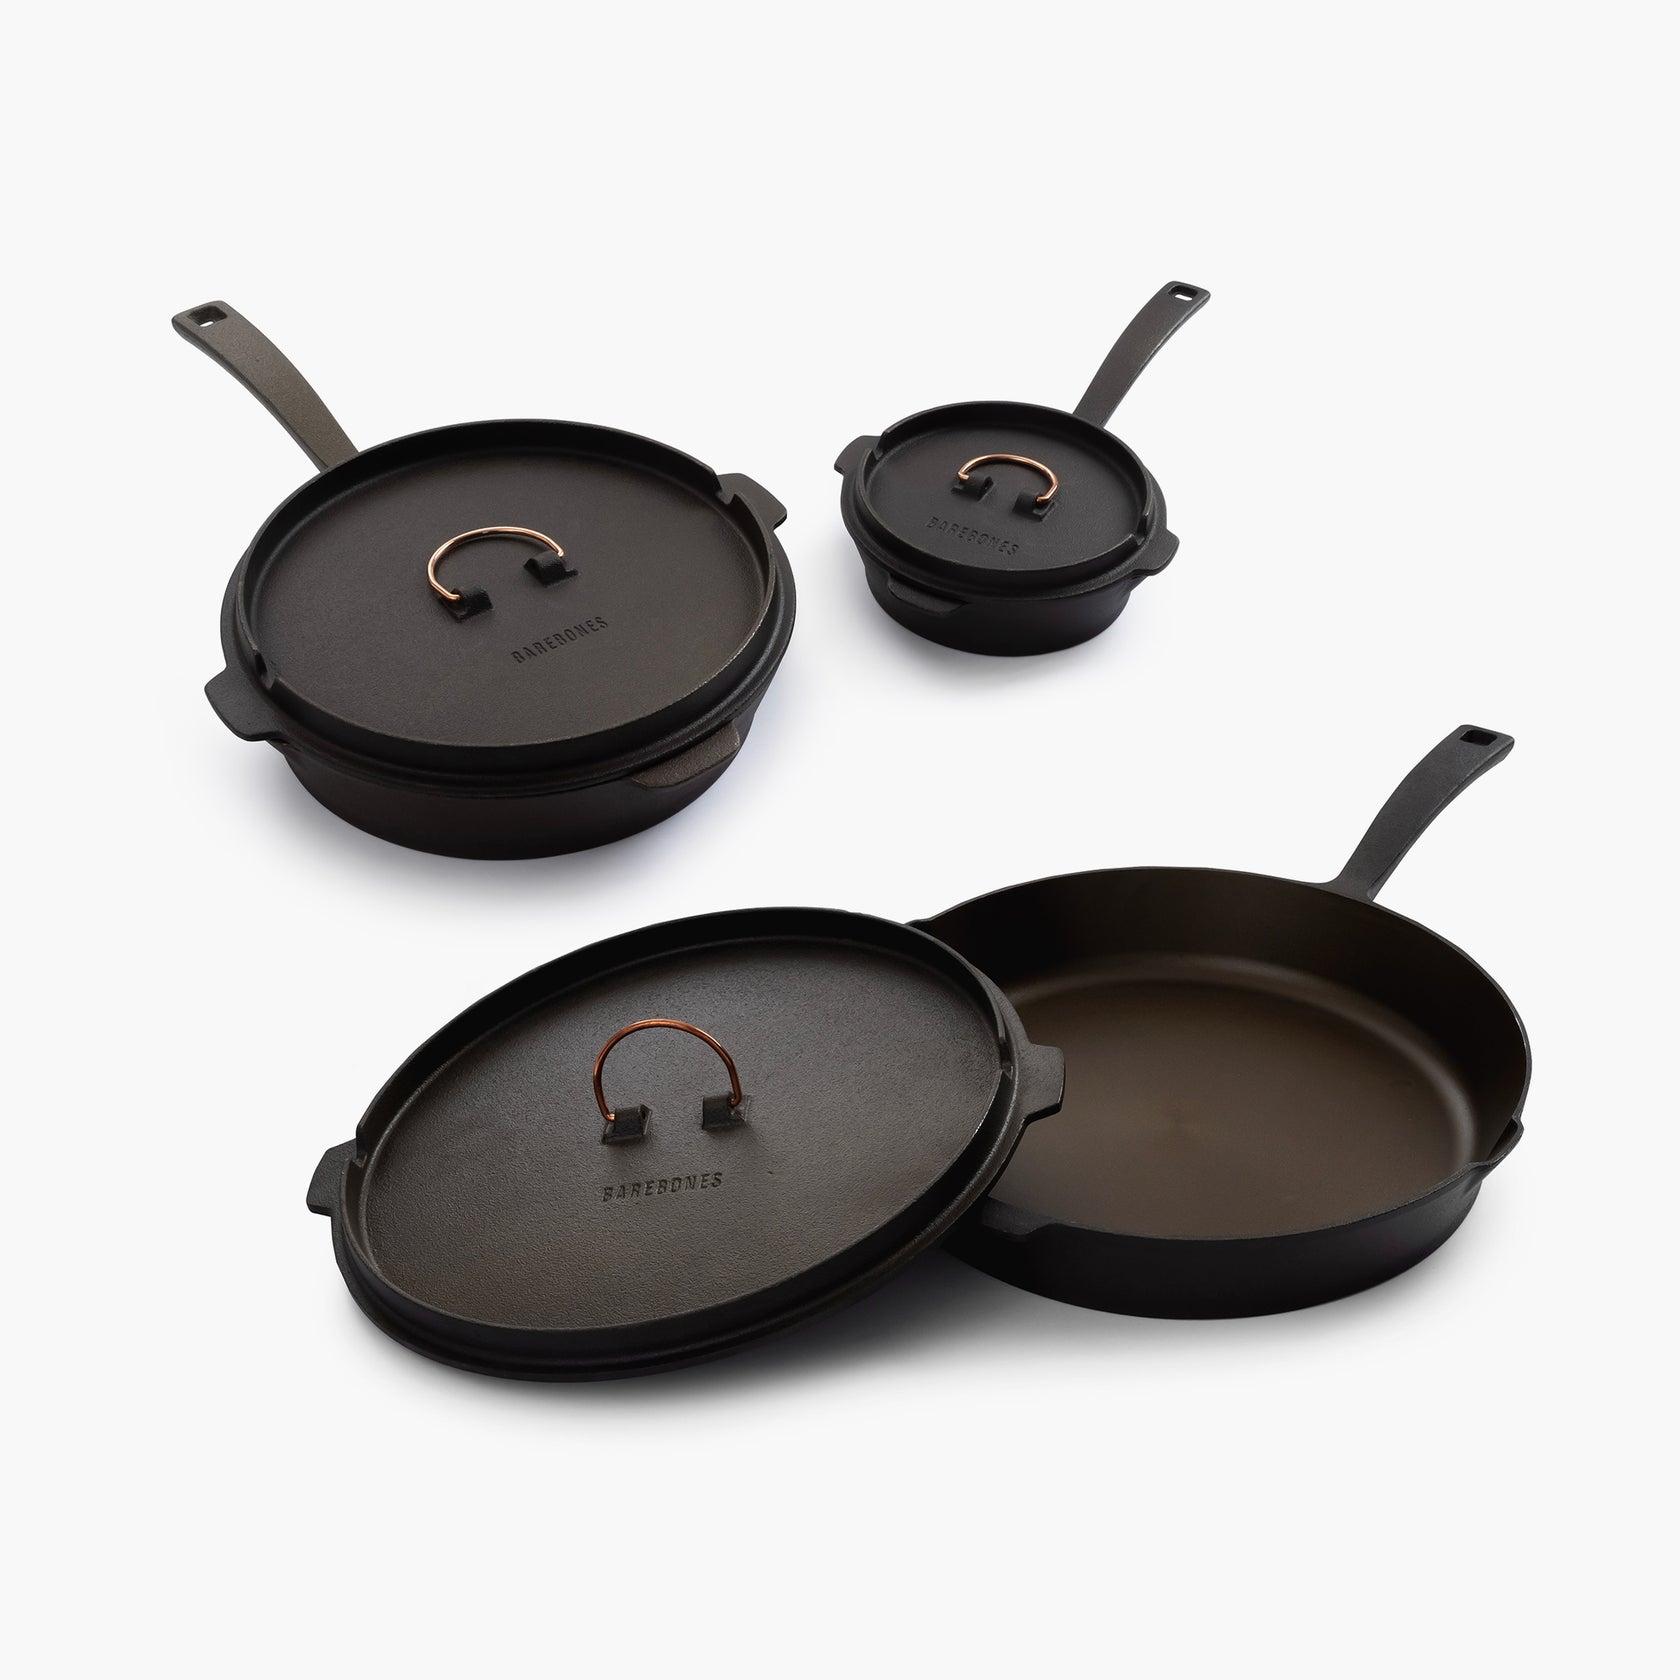 All-in-One Cast Iron Skillet - Three Sizes Available | Barebones